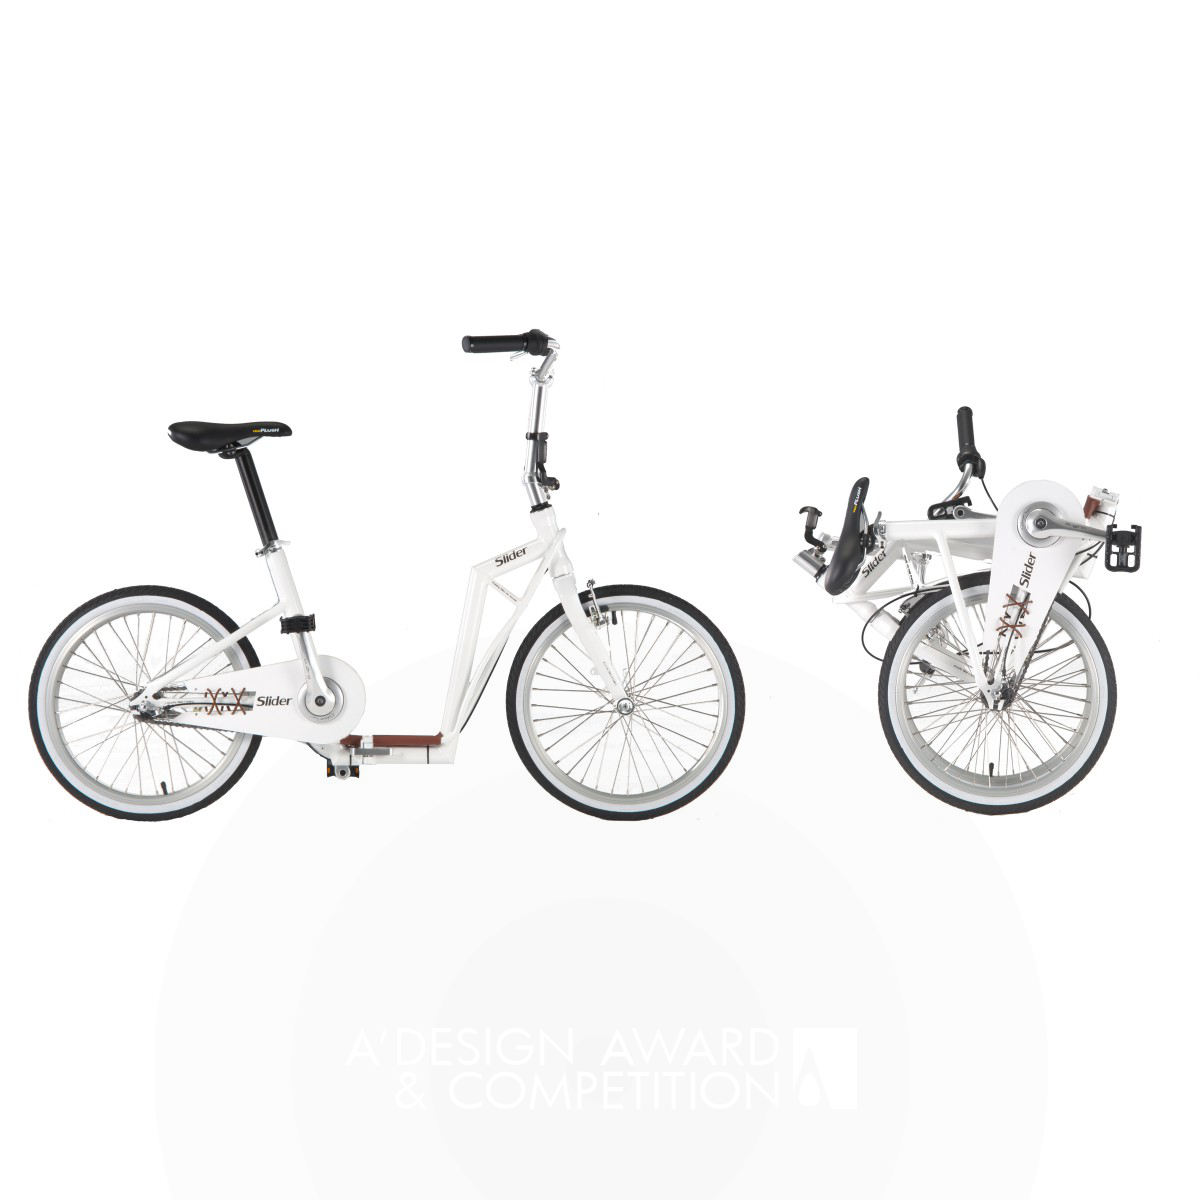 HAOTING Technology Co., LTD. Bicycle